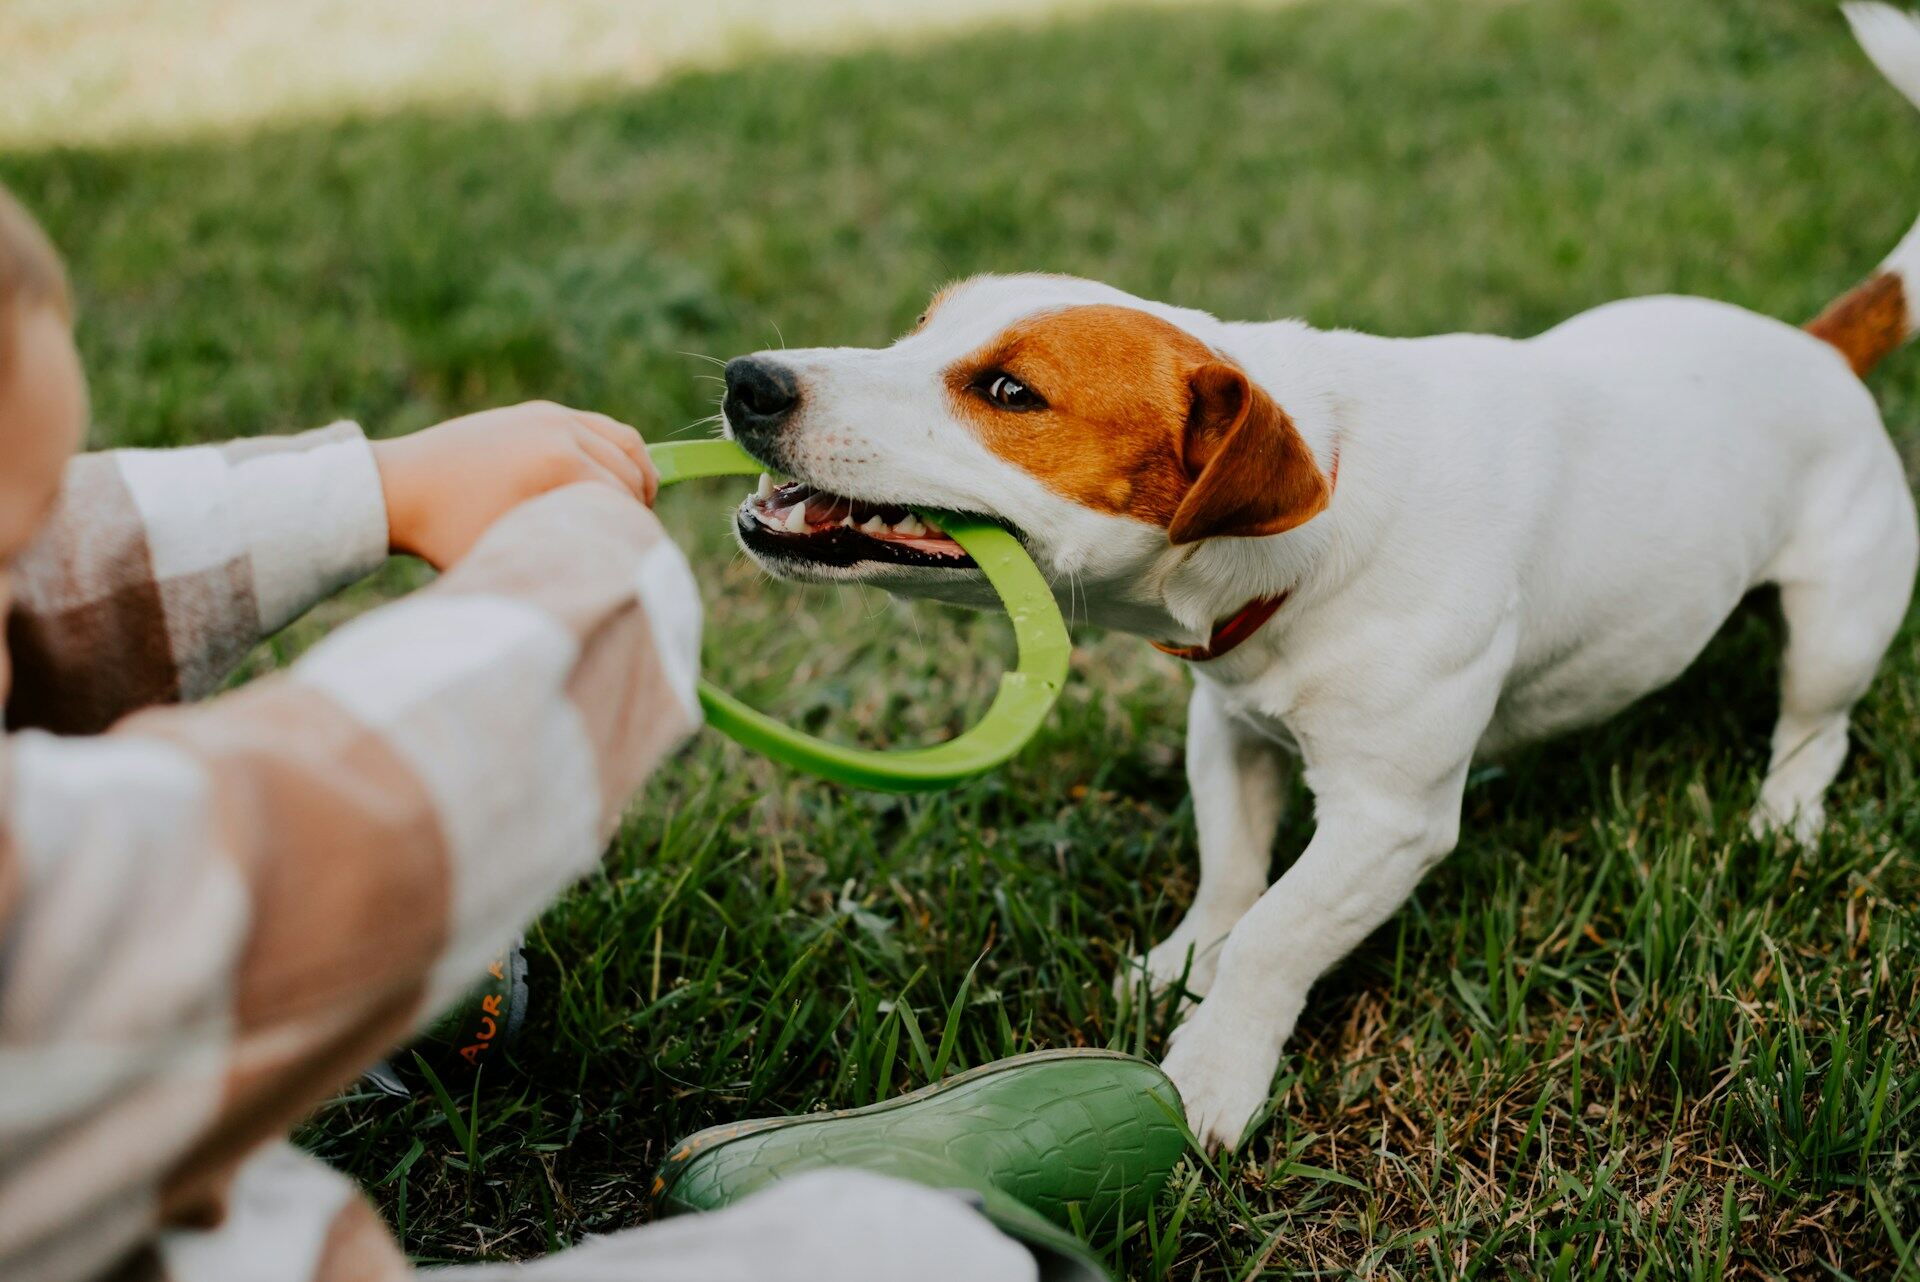 A puppy biting into a chew toy in a game of tug of war